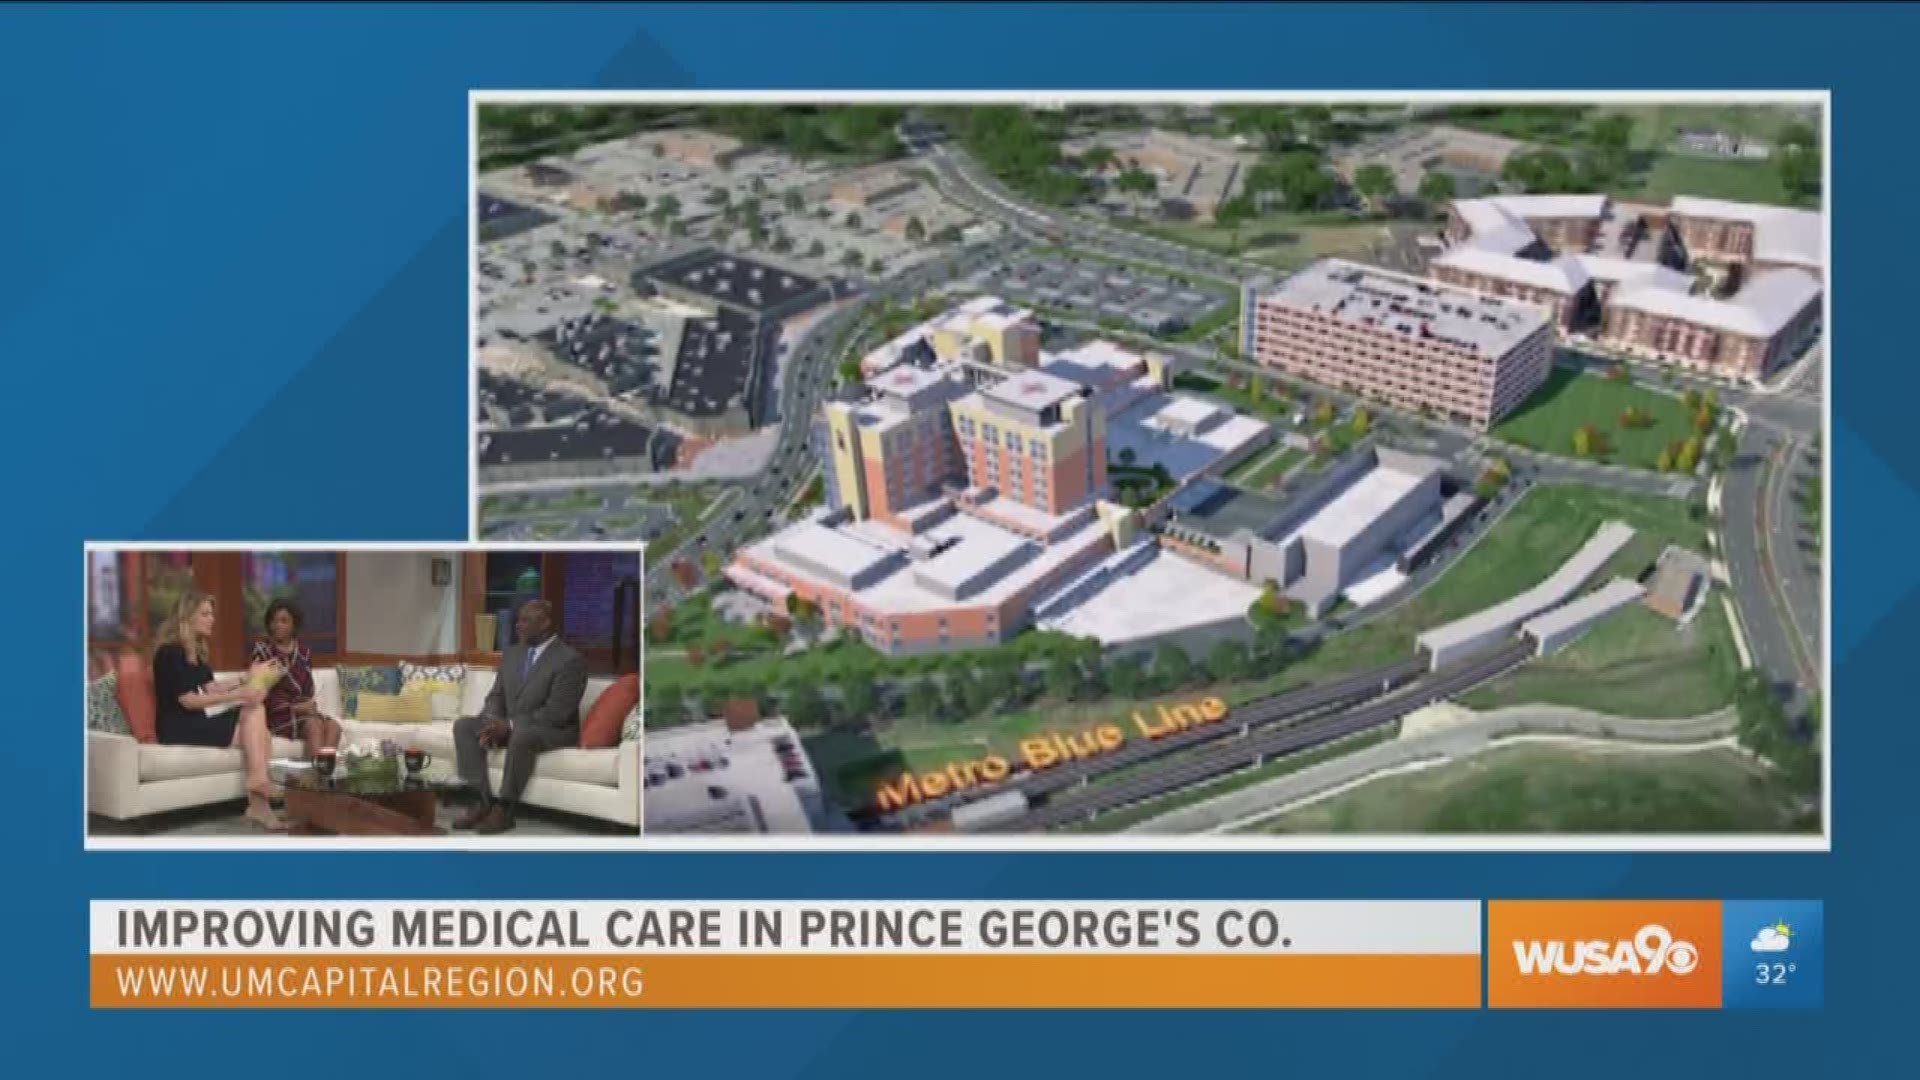 Dr. Joseph Wright, Senior Vice President and Chief Medical Officer of UM Capital Region Health says you should expect the new facility to offer state-of-the-art care, programs and specialty centers for residents of Prince George's County and surrounding areas.